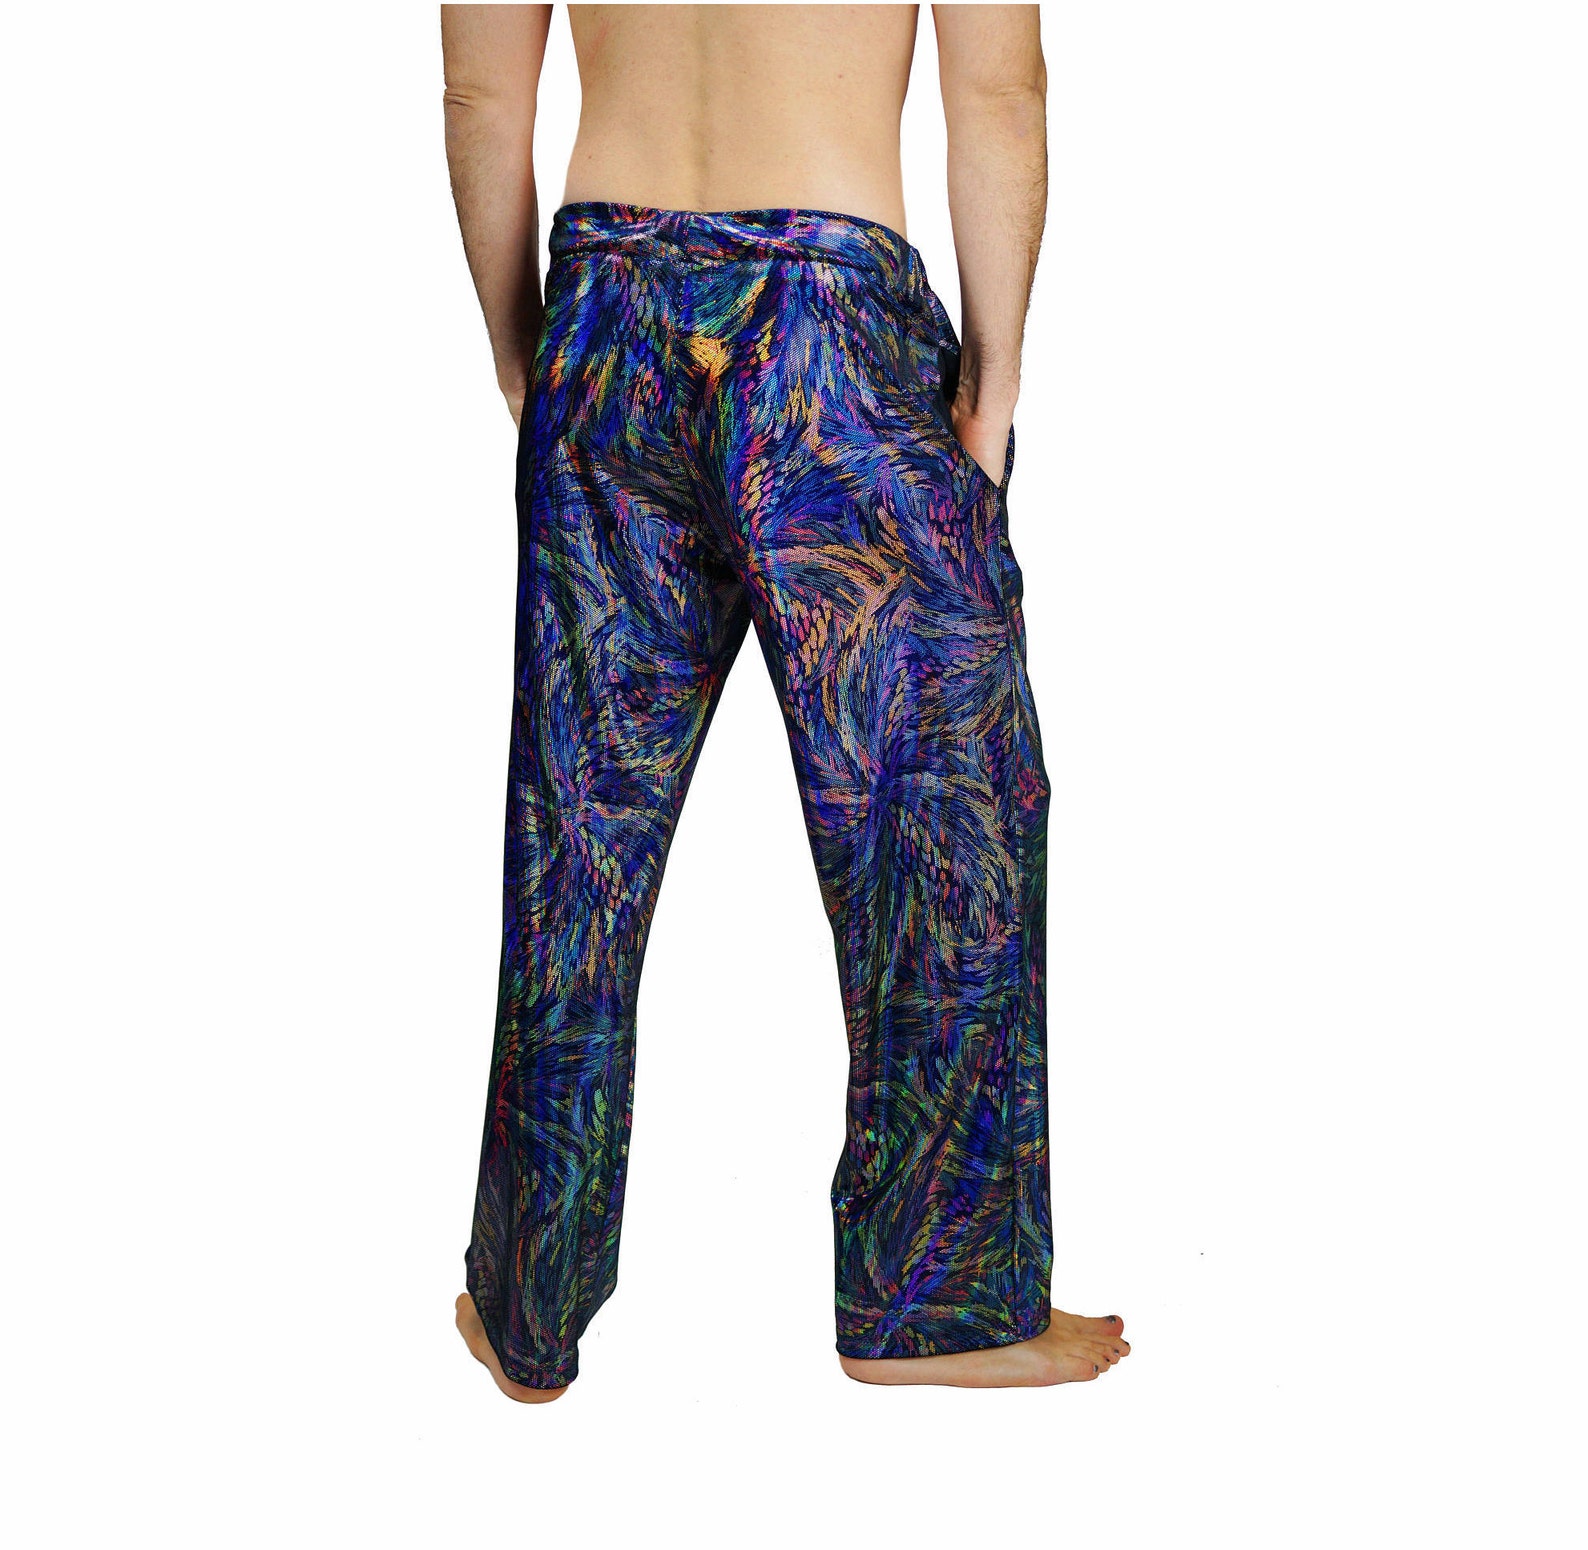 Psychedelic Pants Rave Pants Rainbow Festival Trousers Mens | Etsy